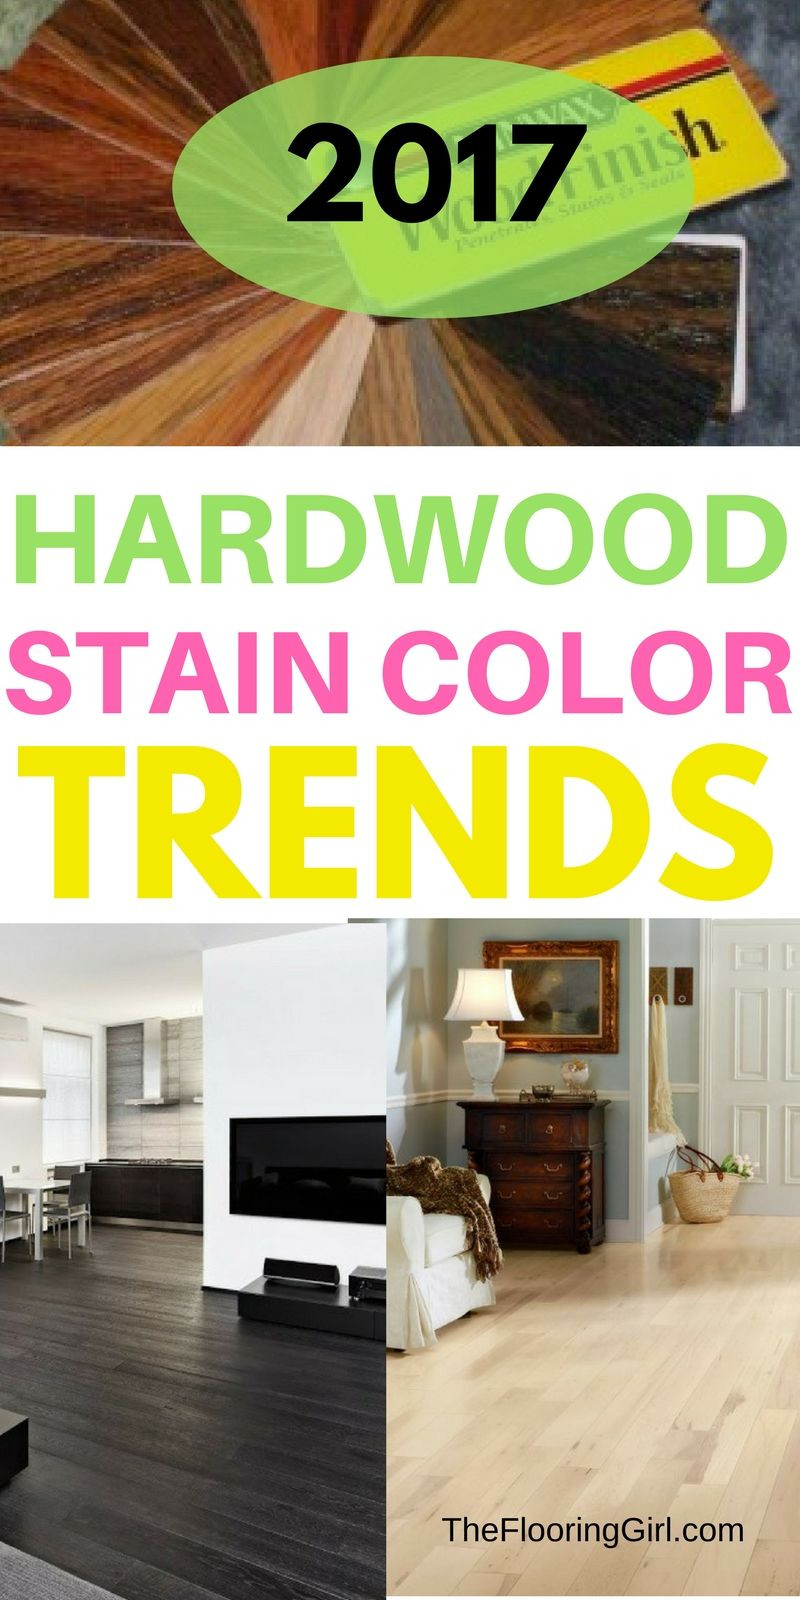 26 Trendy Multi Colored Hardwood Floors 2024 free download multi colored hardwood floors of hardwood flooring stain color trends 2018 more from the flooring within hardwood flooring stain color trends for 2017 hardwood colors that are in style thefl